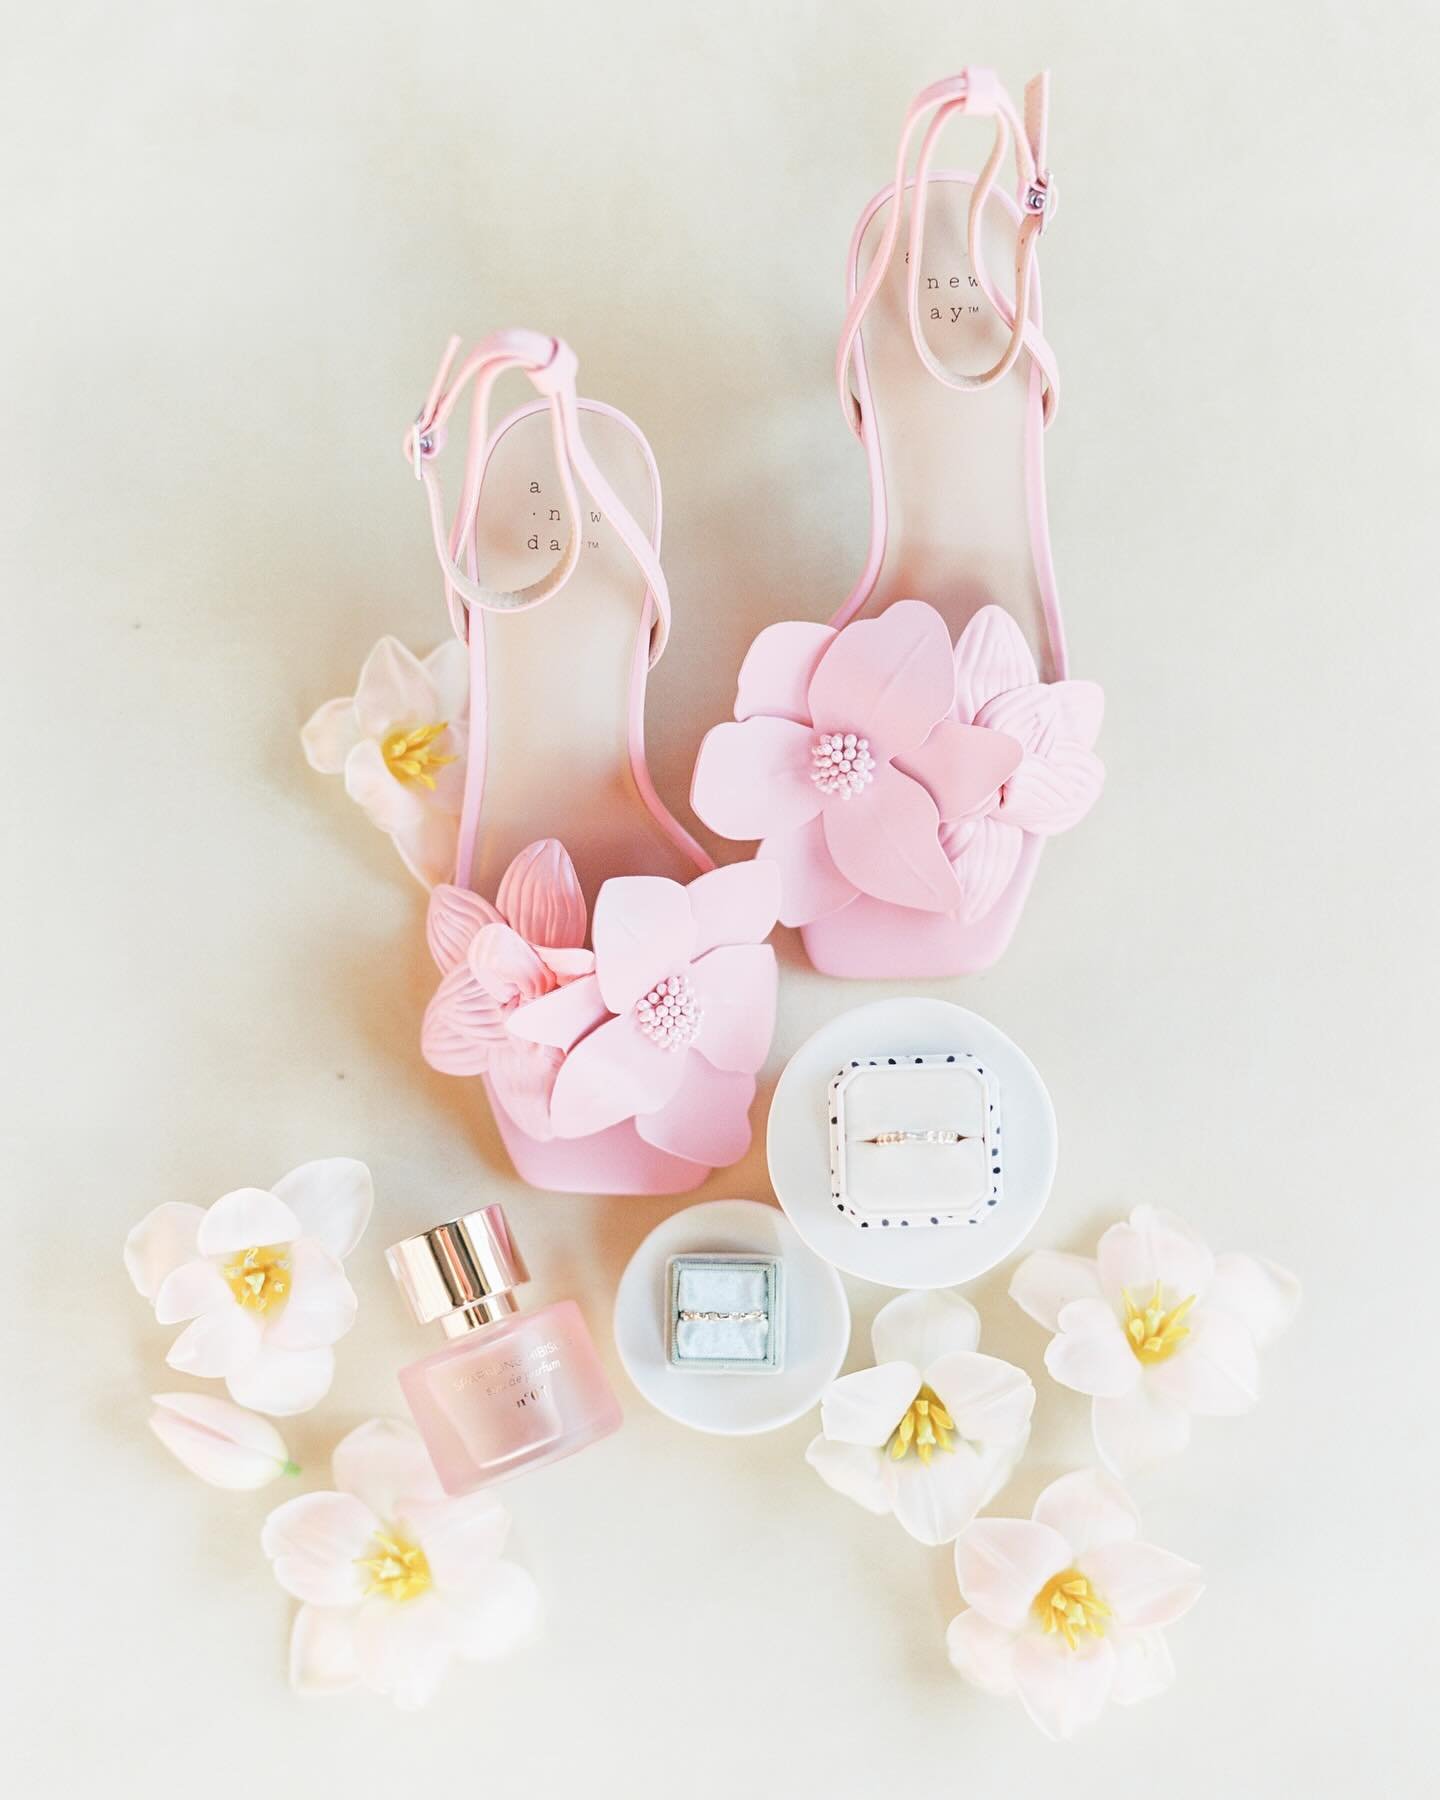 It&rsquo;s May! Which means we&rsquo;re officially into our wedding season and it feels like those cold, dark days are finally behind us 🌸 

And who doesn&rsquo;t love a bright-colored flatlay? The pink shoes are definitely a win for me! I love kick